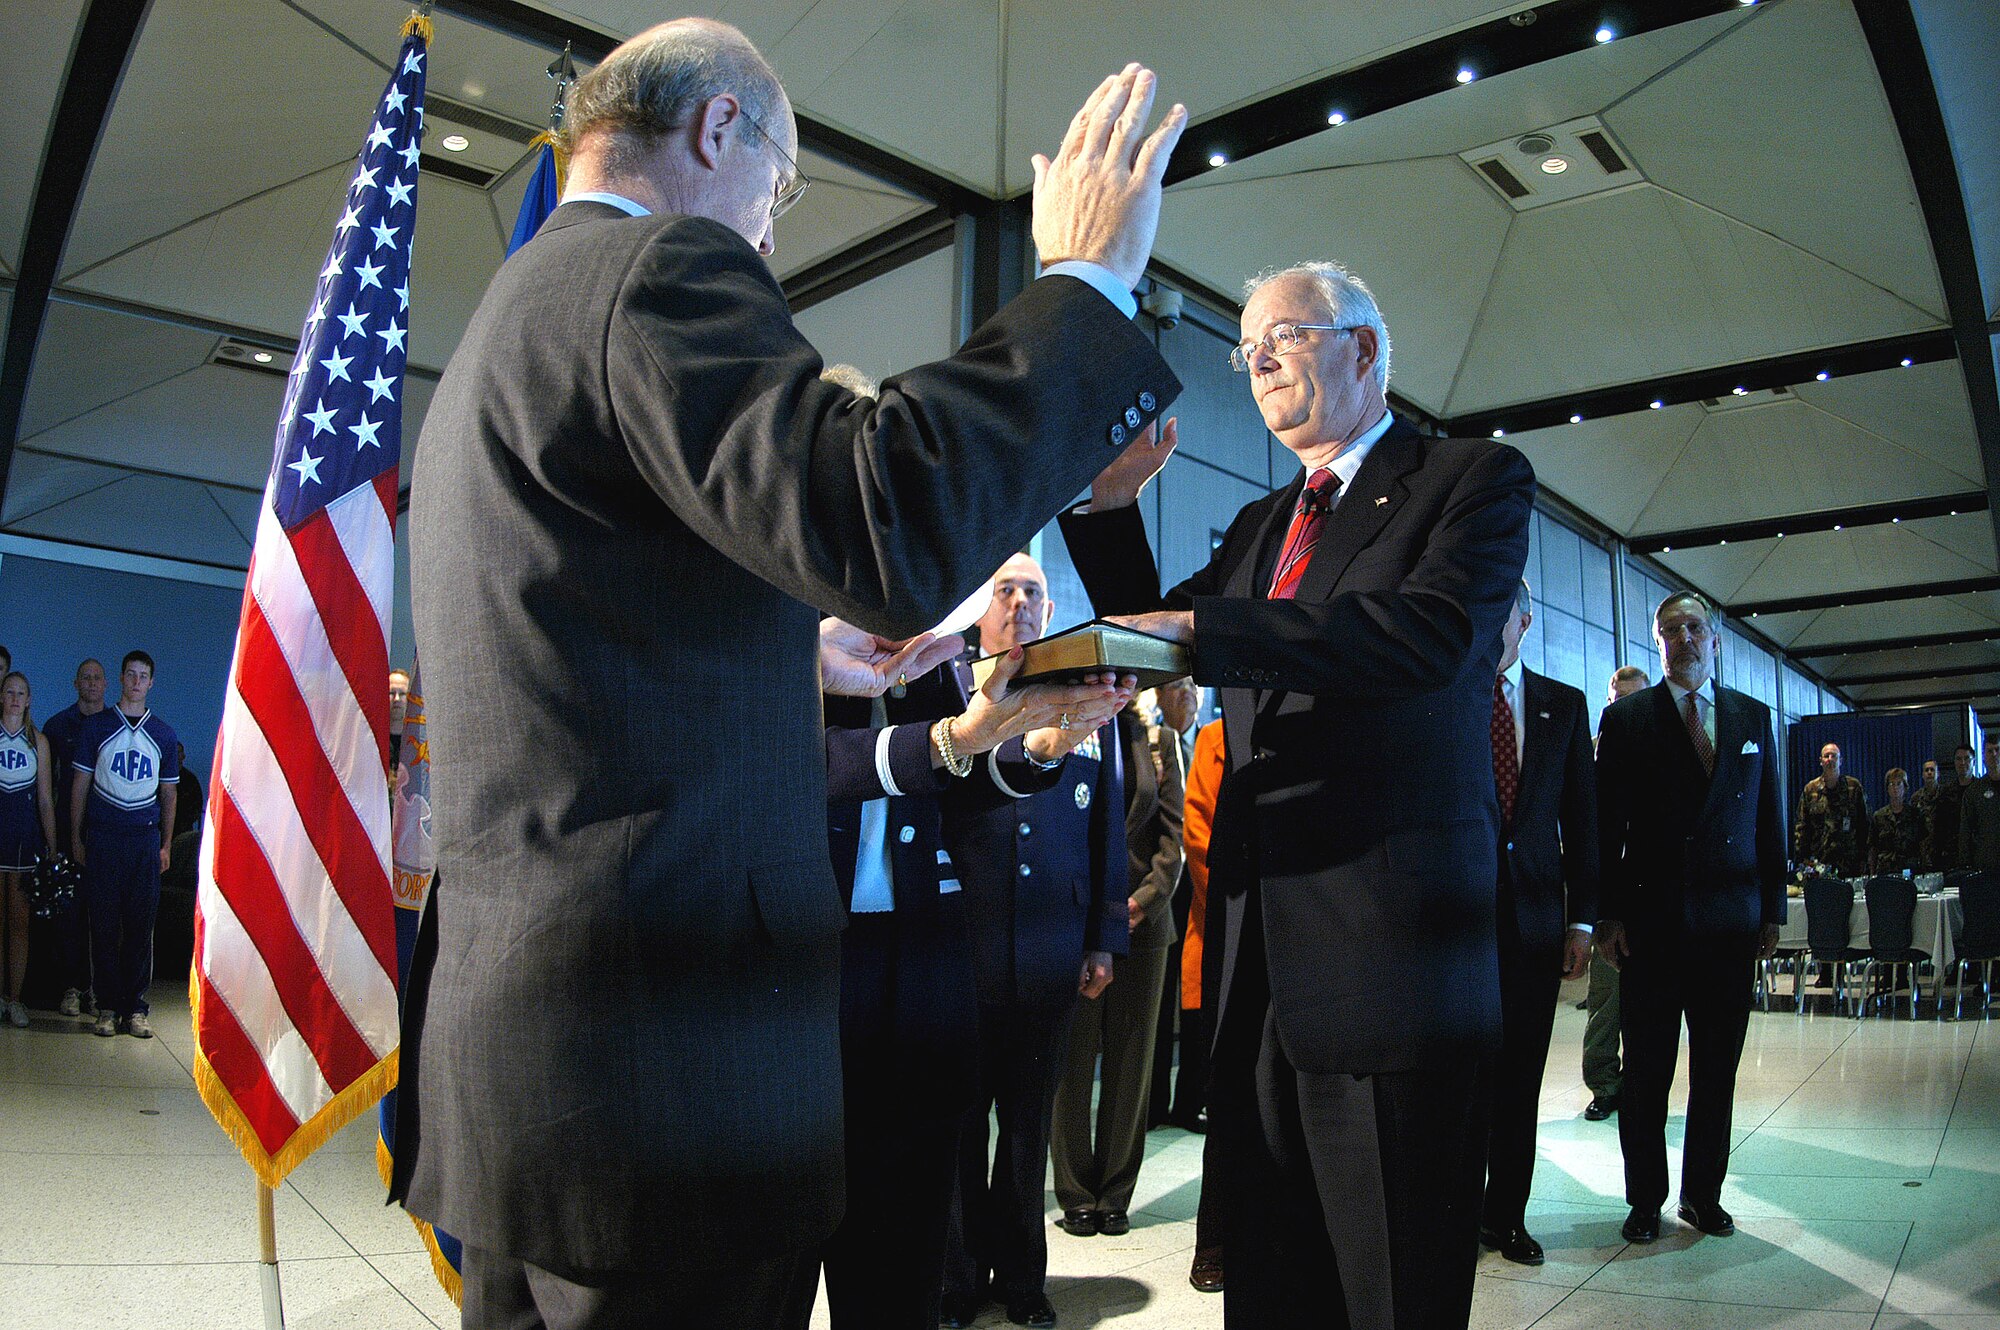 U.S. AIR FORCE ACADEMY, Colo. (AFPN) -- Secretary of the Air Force, Michael W. Wynne, takes the oath of office from Pete Geren during his swearing-in ceremony today at Mitchell Hall here. Mr. Geren has been the acting SECAF since July 29. (U.S. Air Force photo by Charley Starr)                  